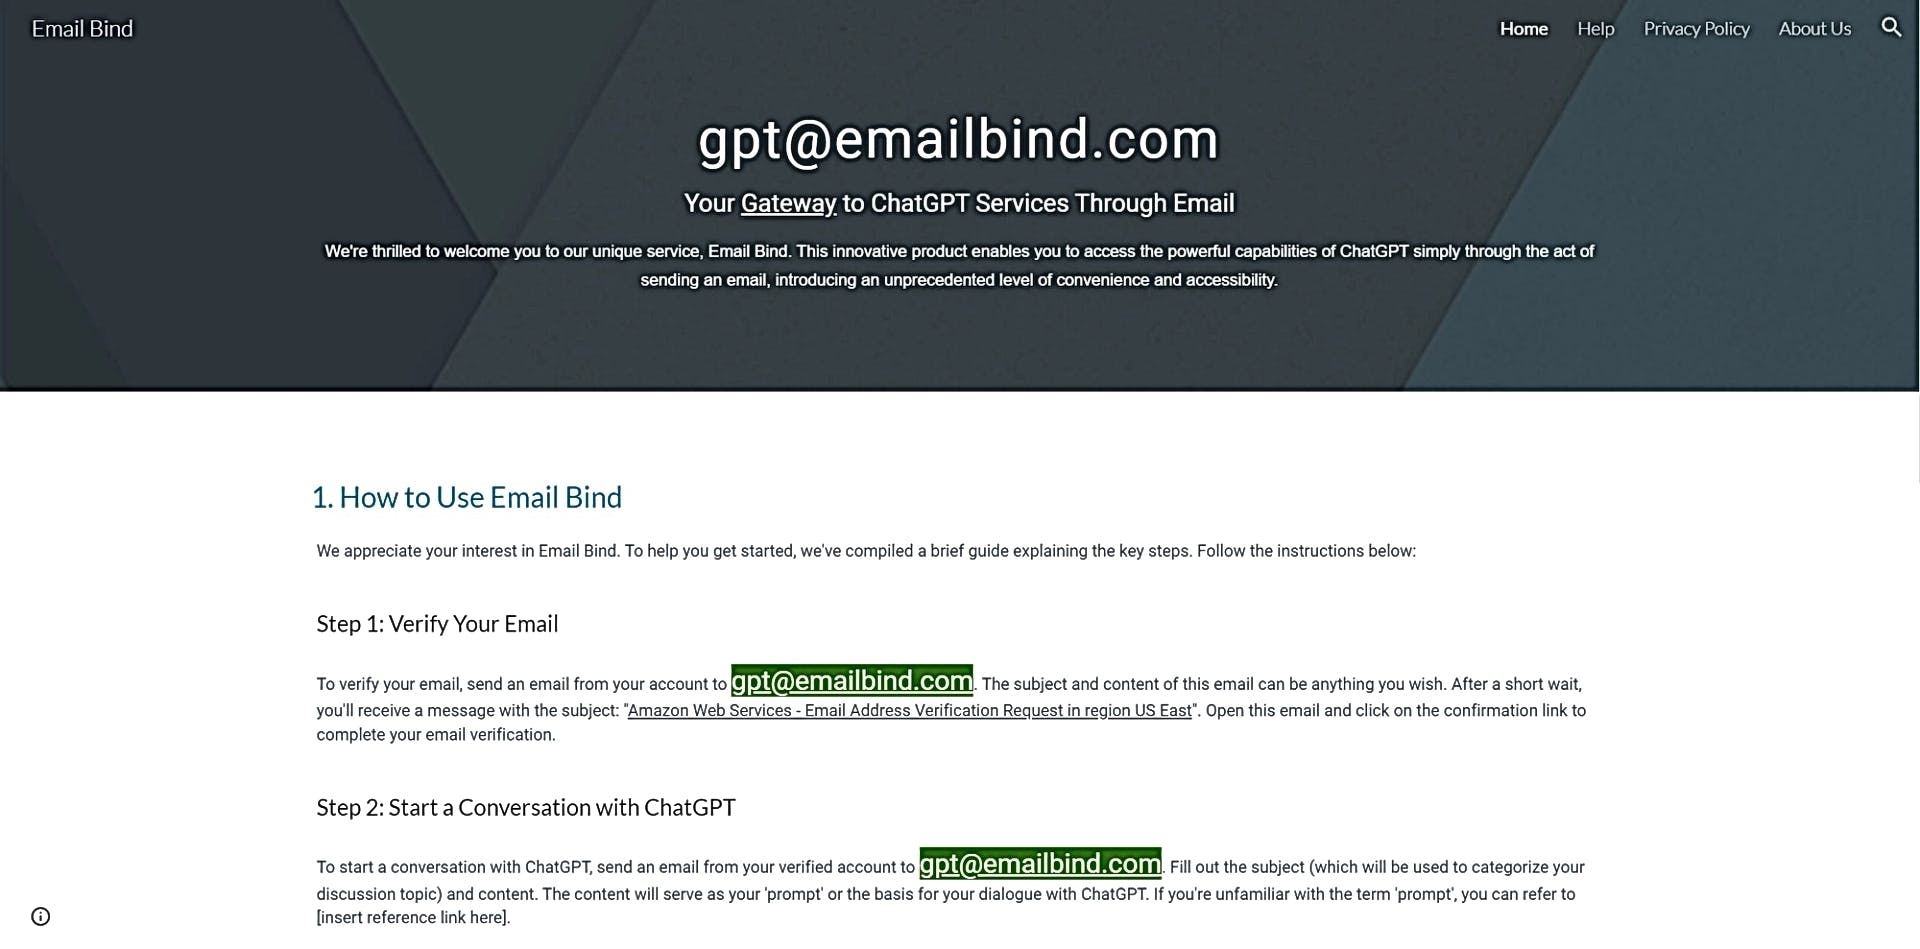 Email Bind featured